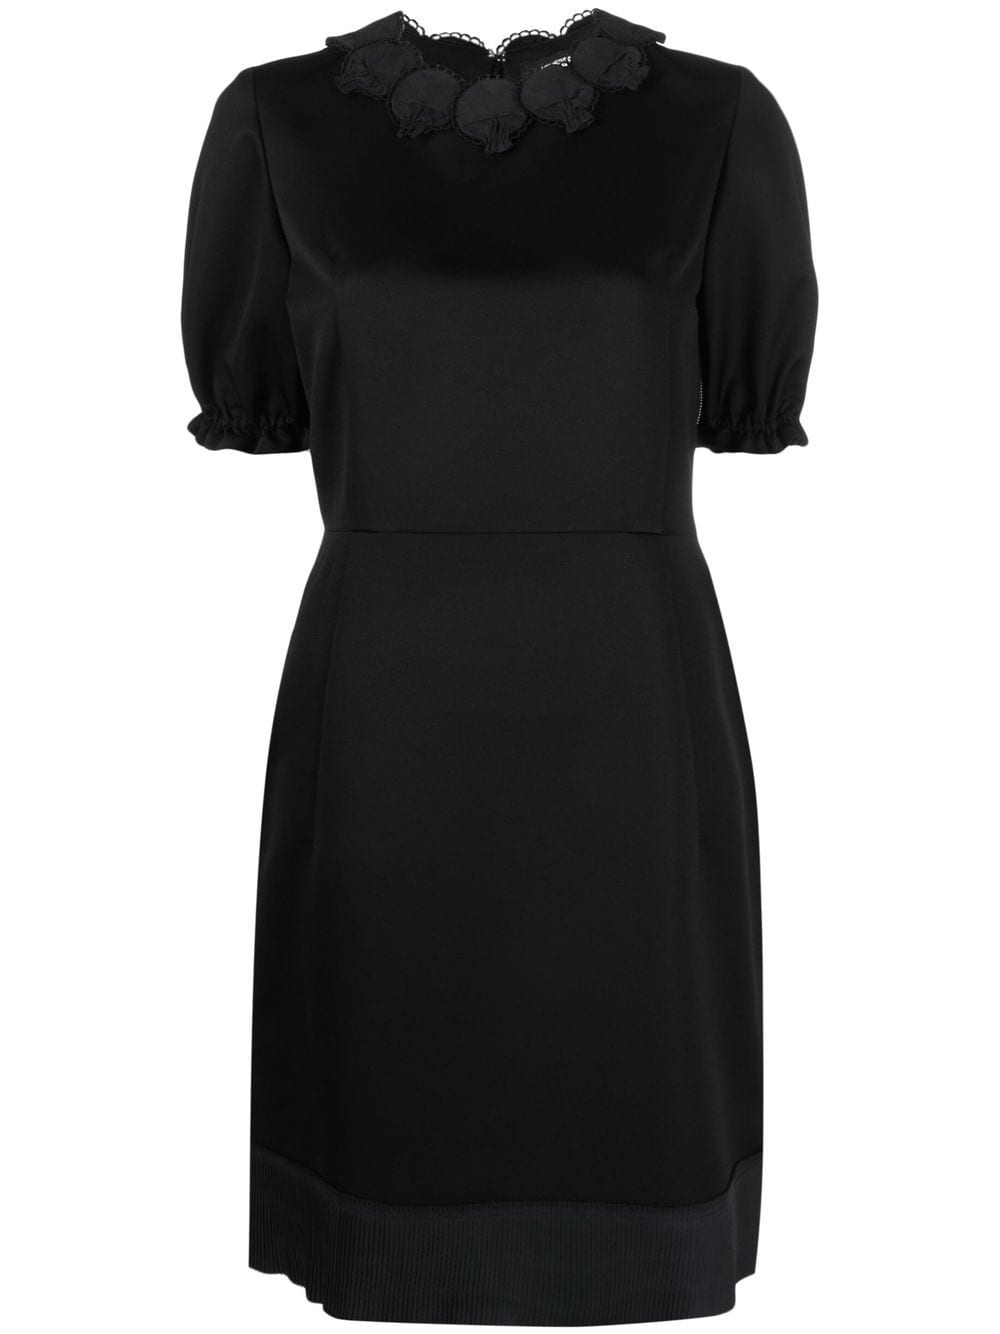 Undercover Layered Dress In Black